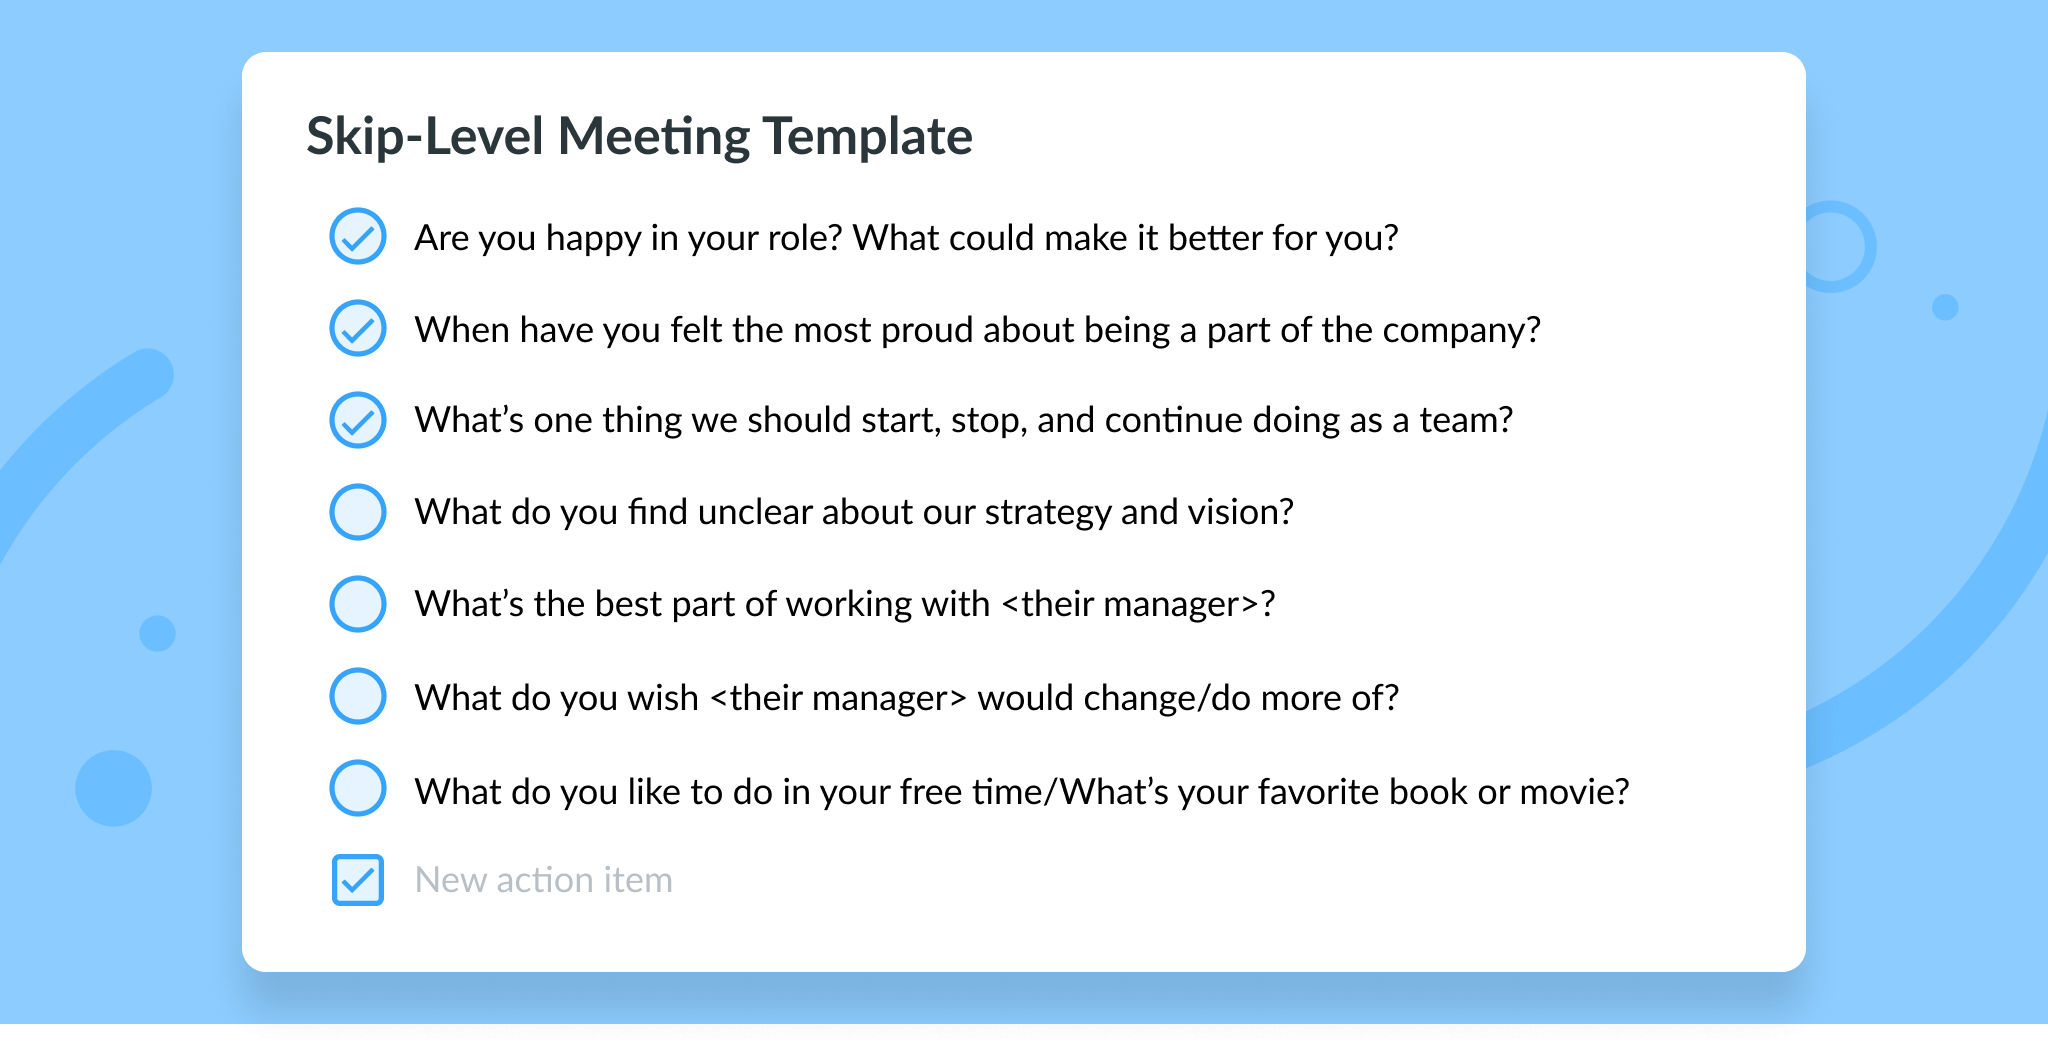 SkipLevel Meetings Top Questions and Best Practices [Free Template]